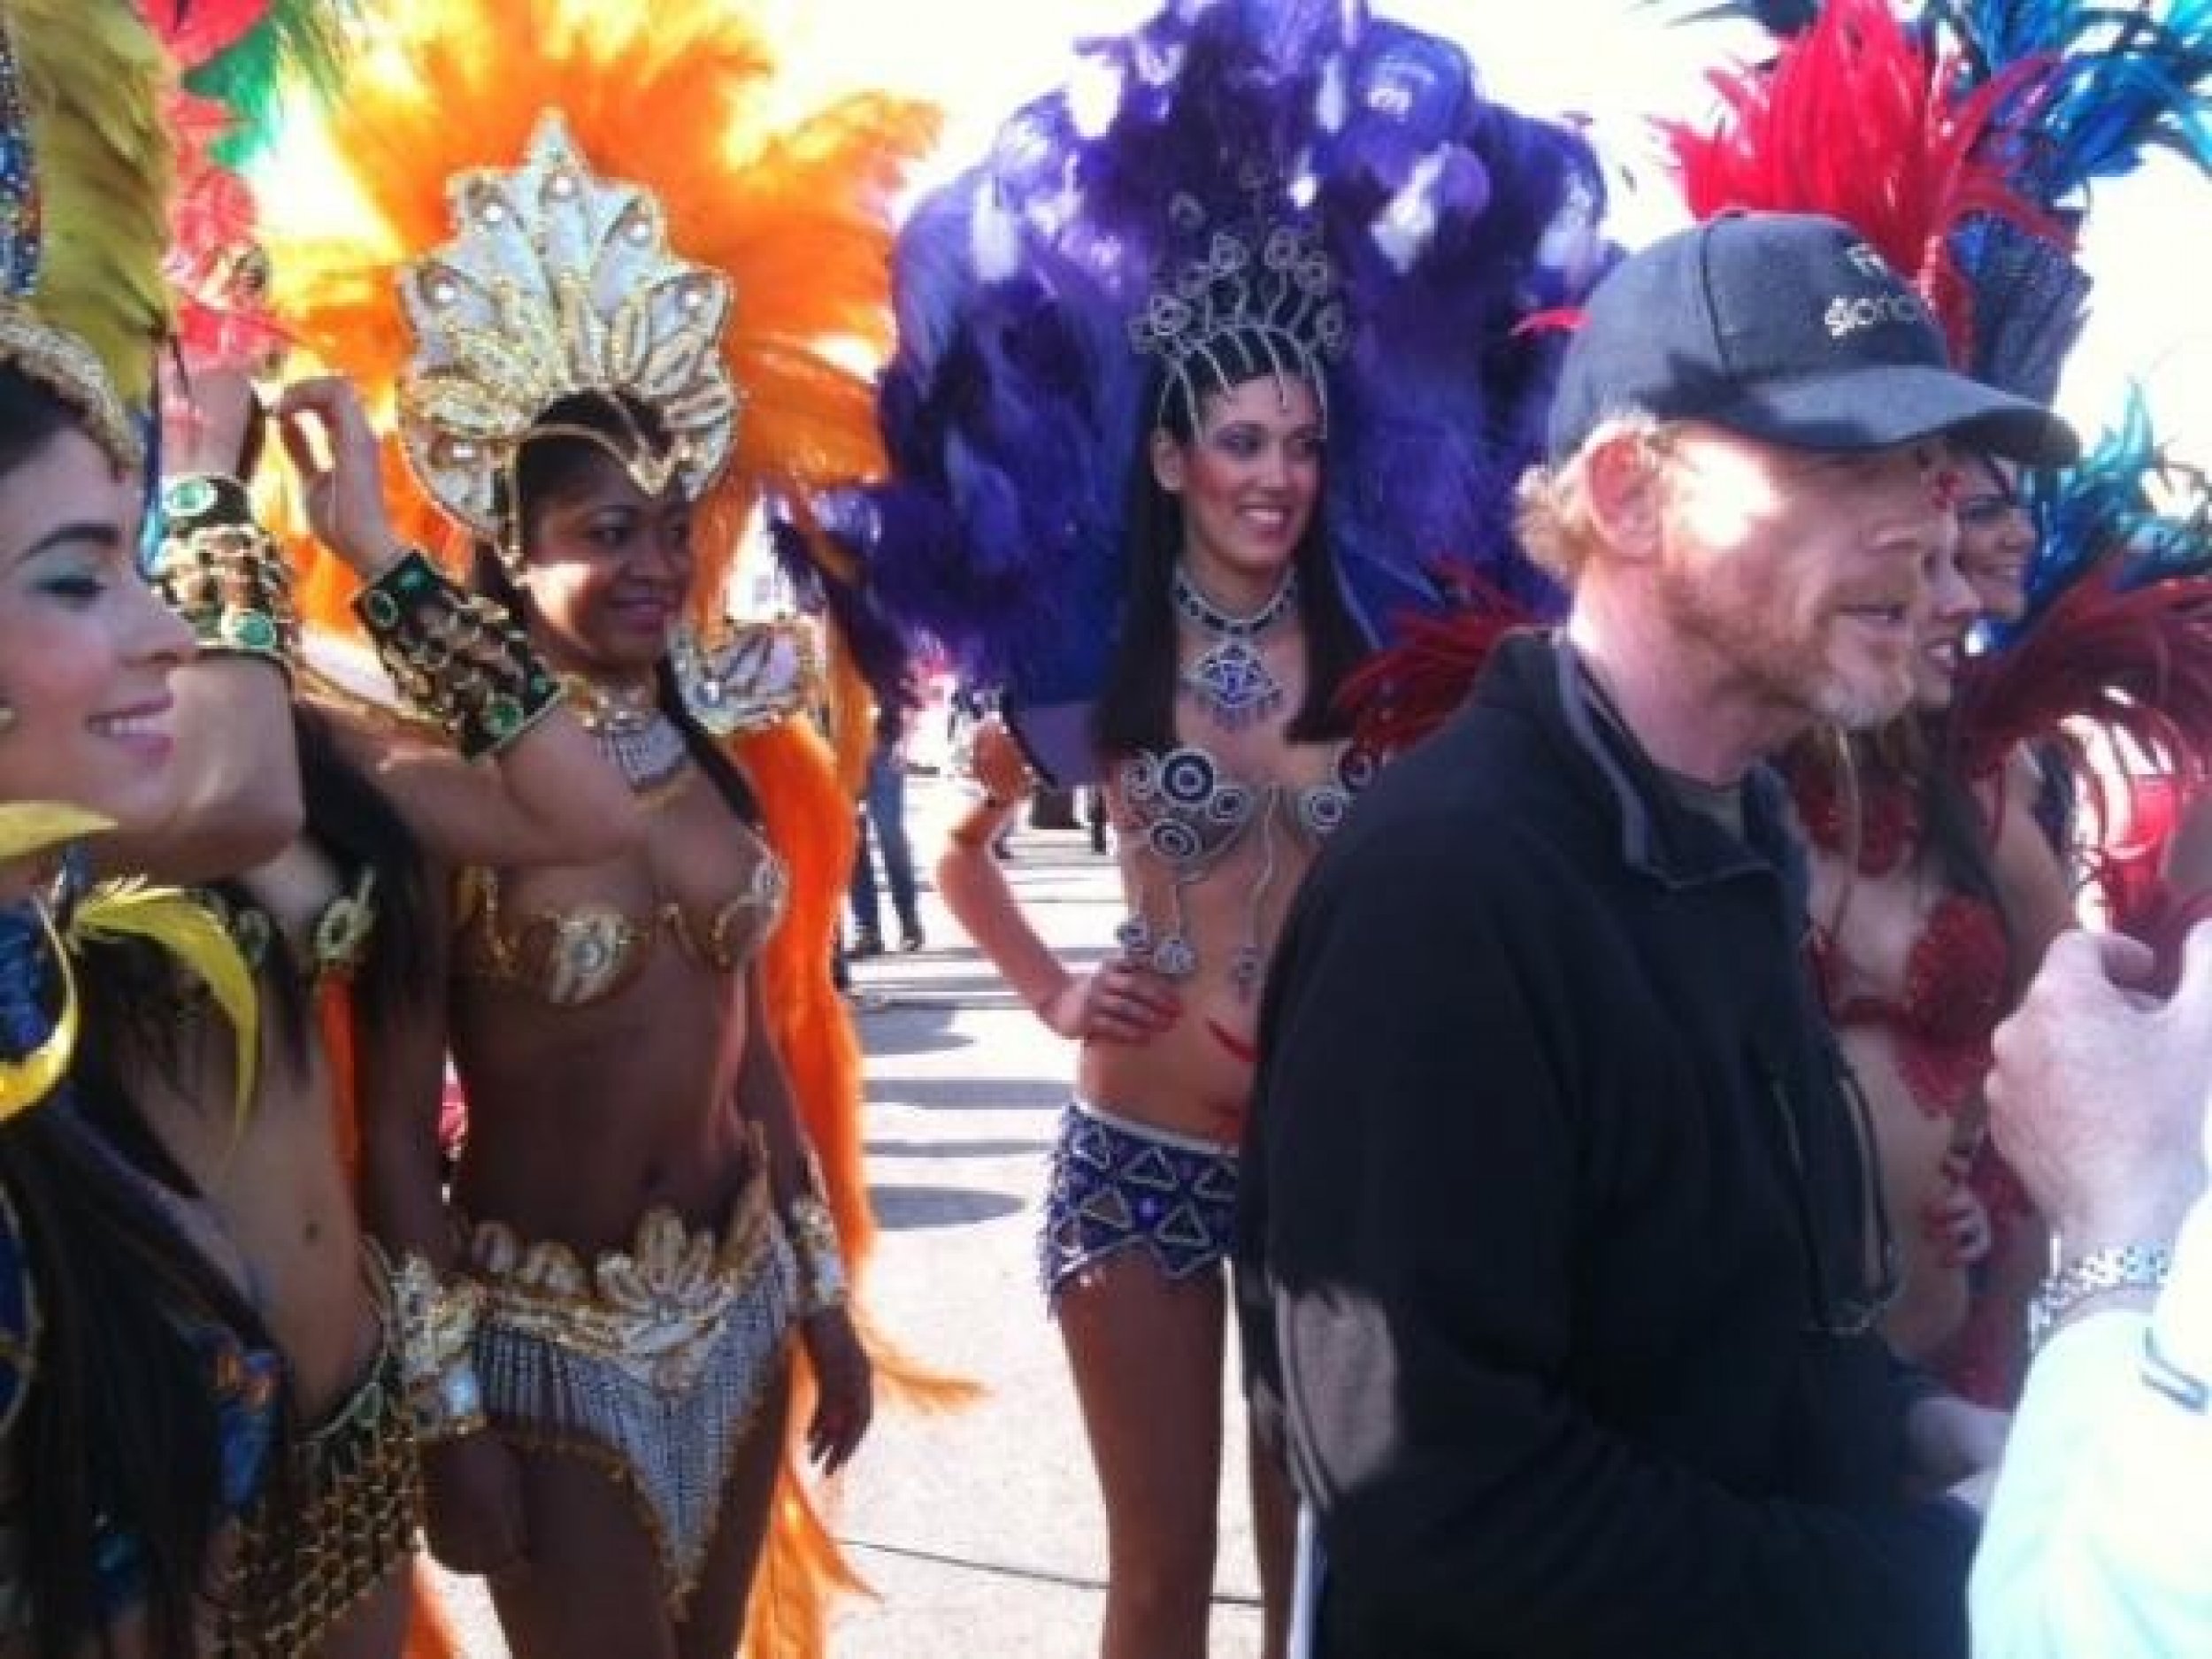 Ron Howard walks by the show.